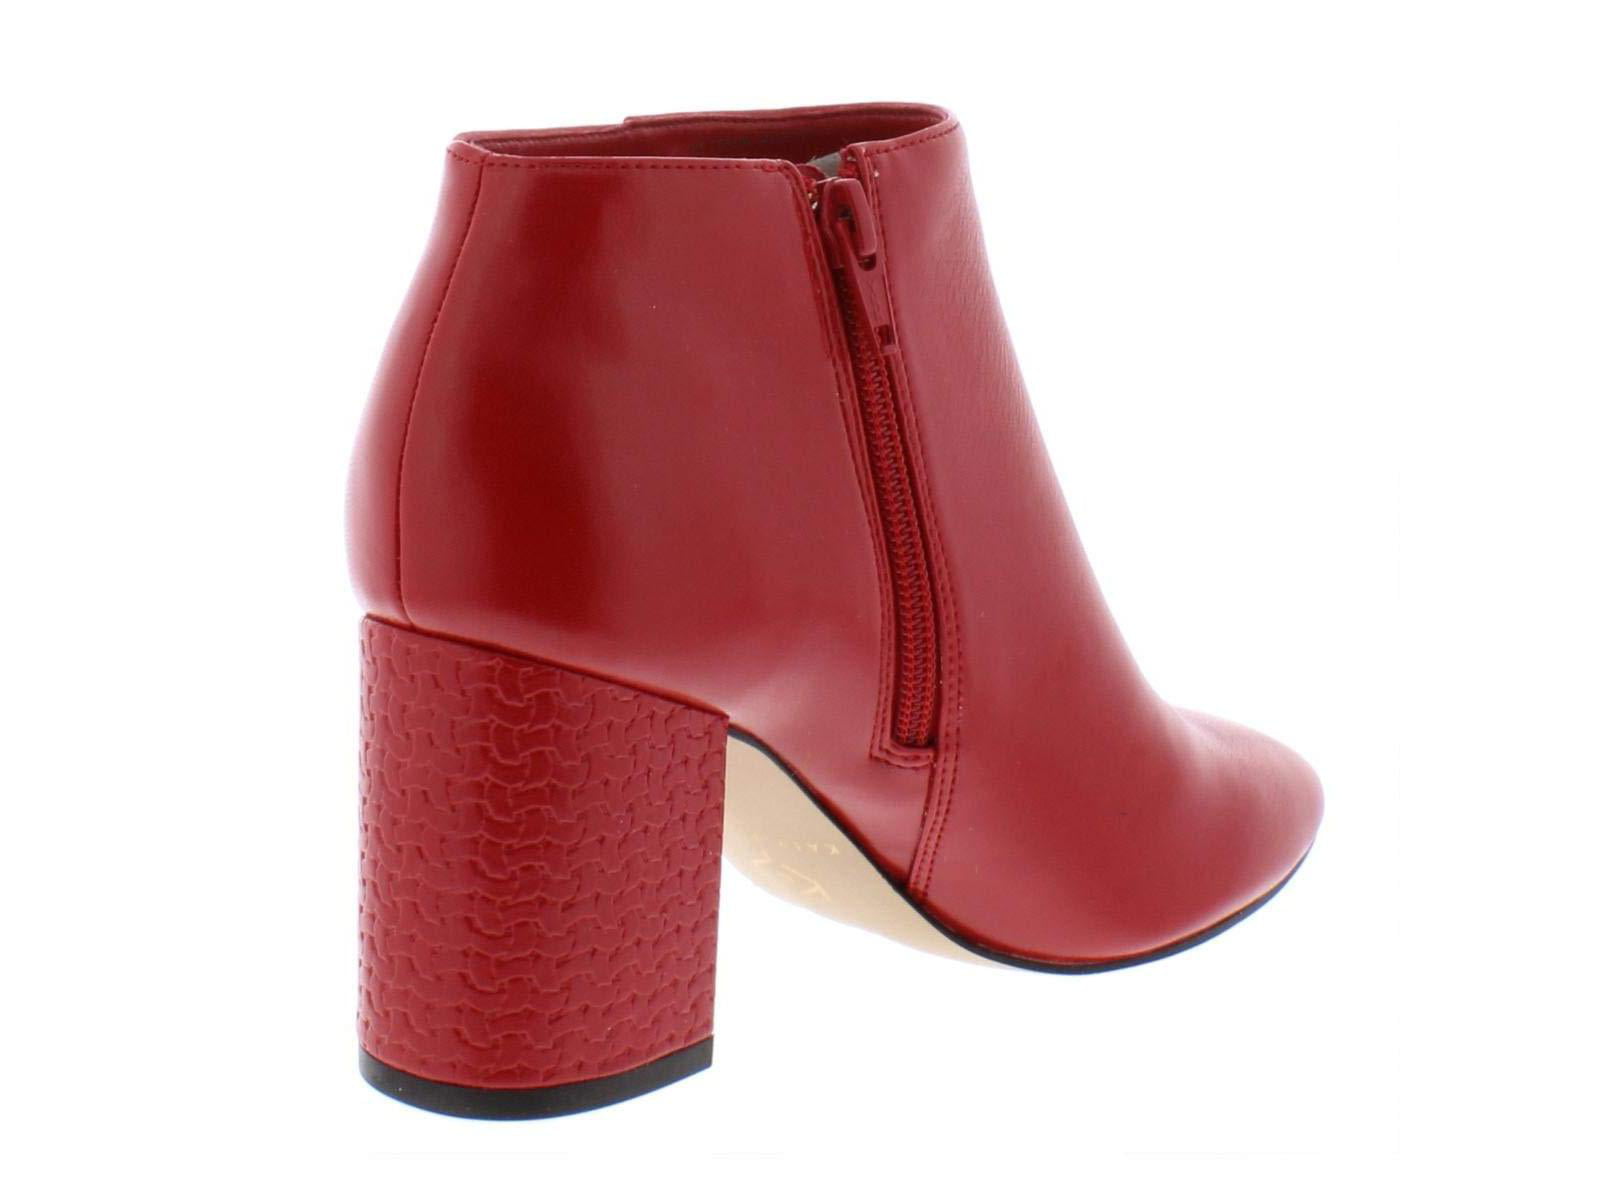 Katy Perry - Katy Perry Women's Bootie Ankle Boot - Walmart.com ...